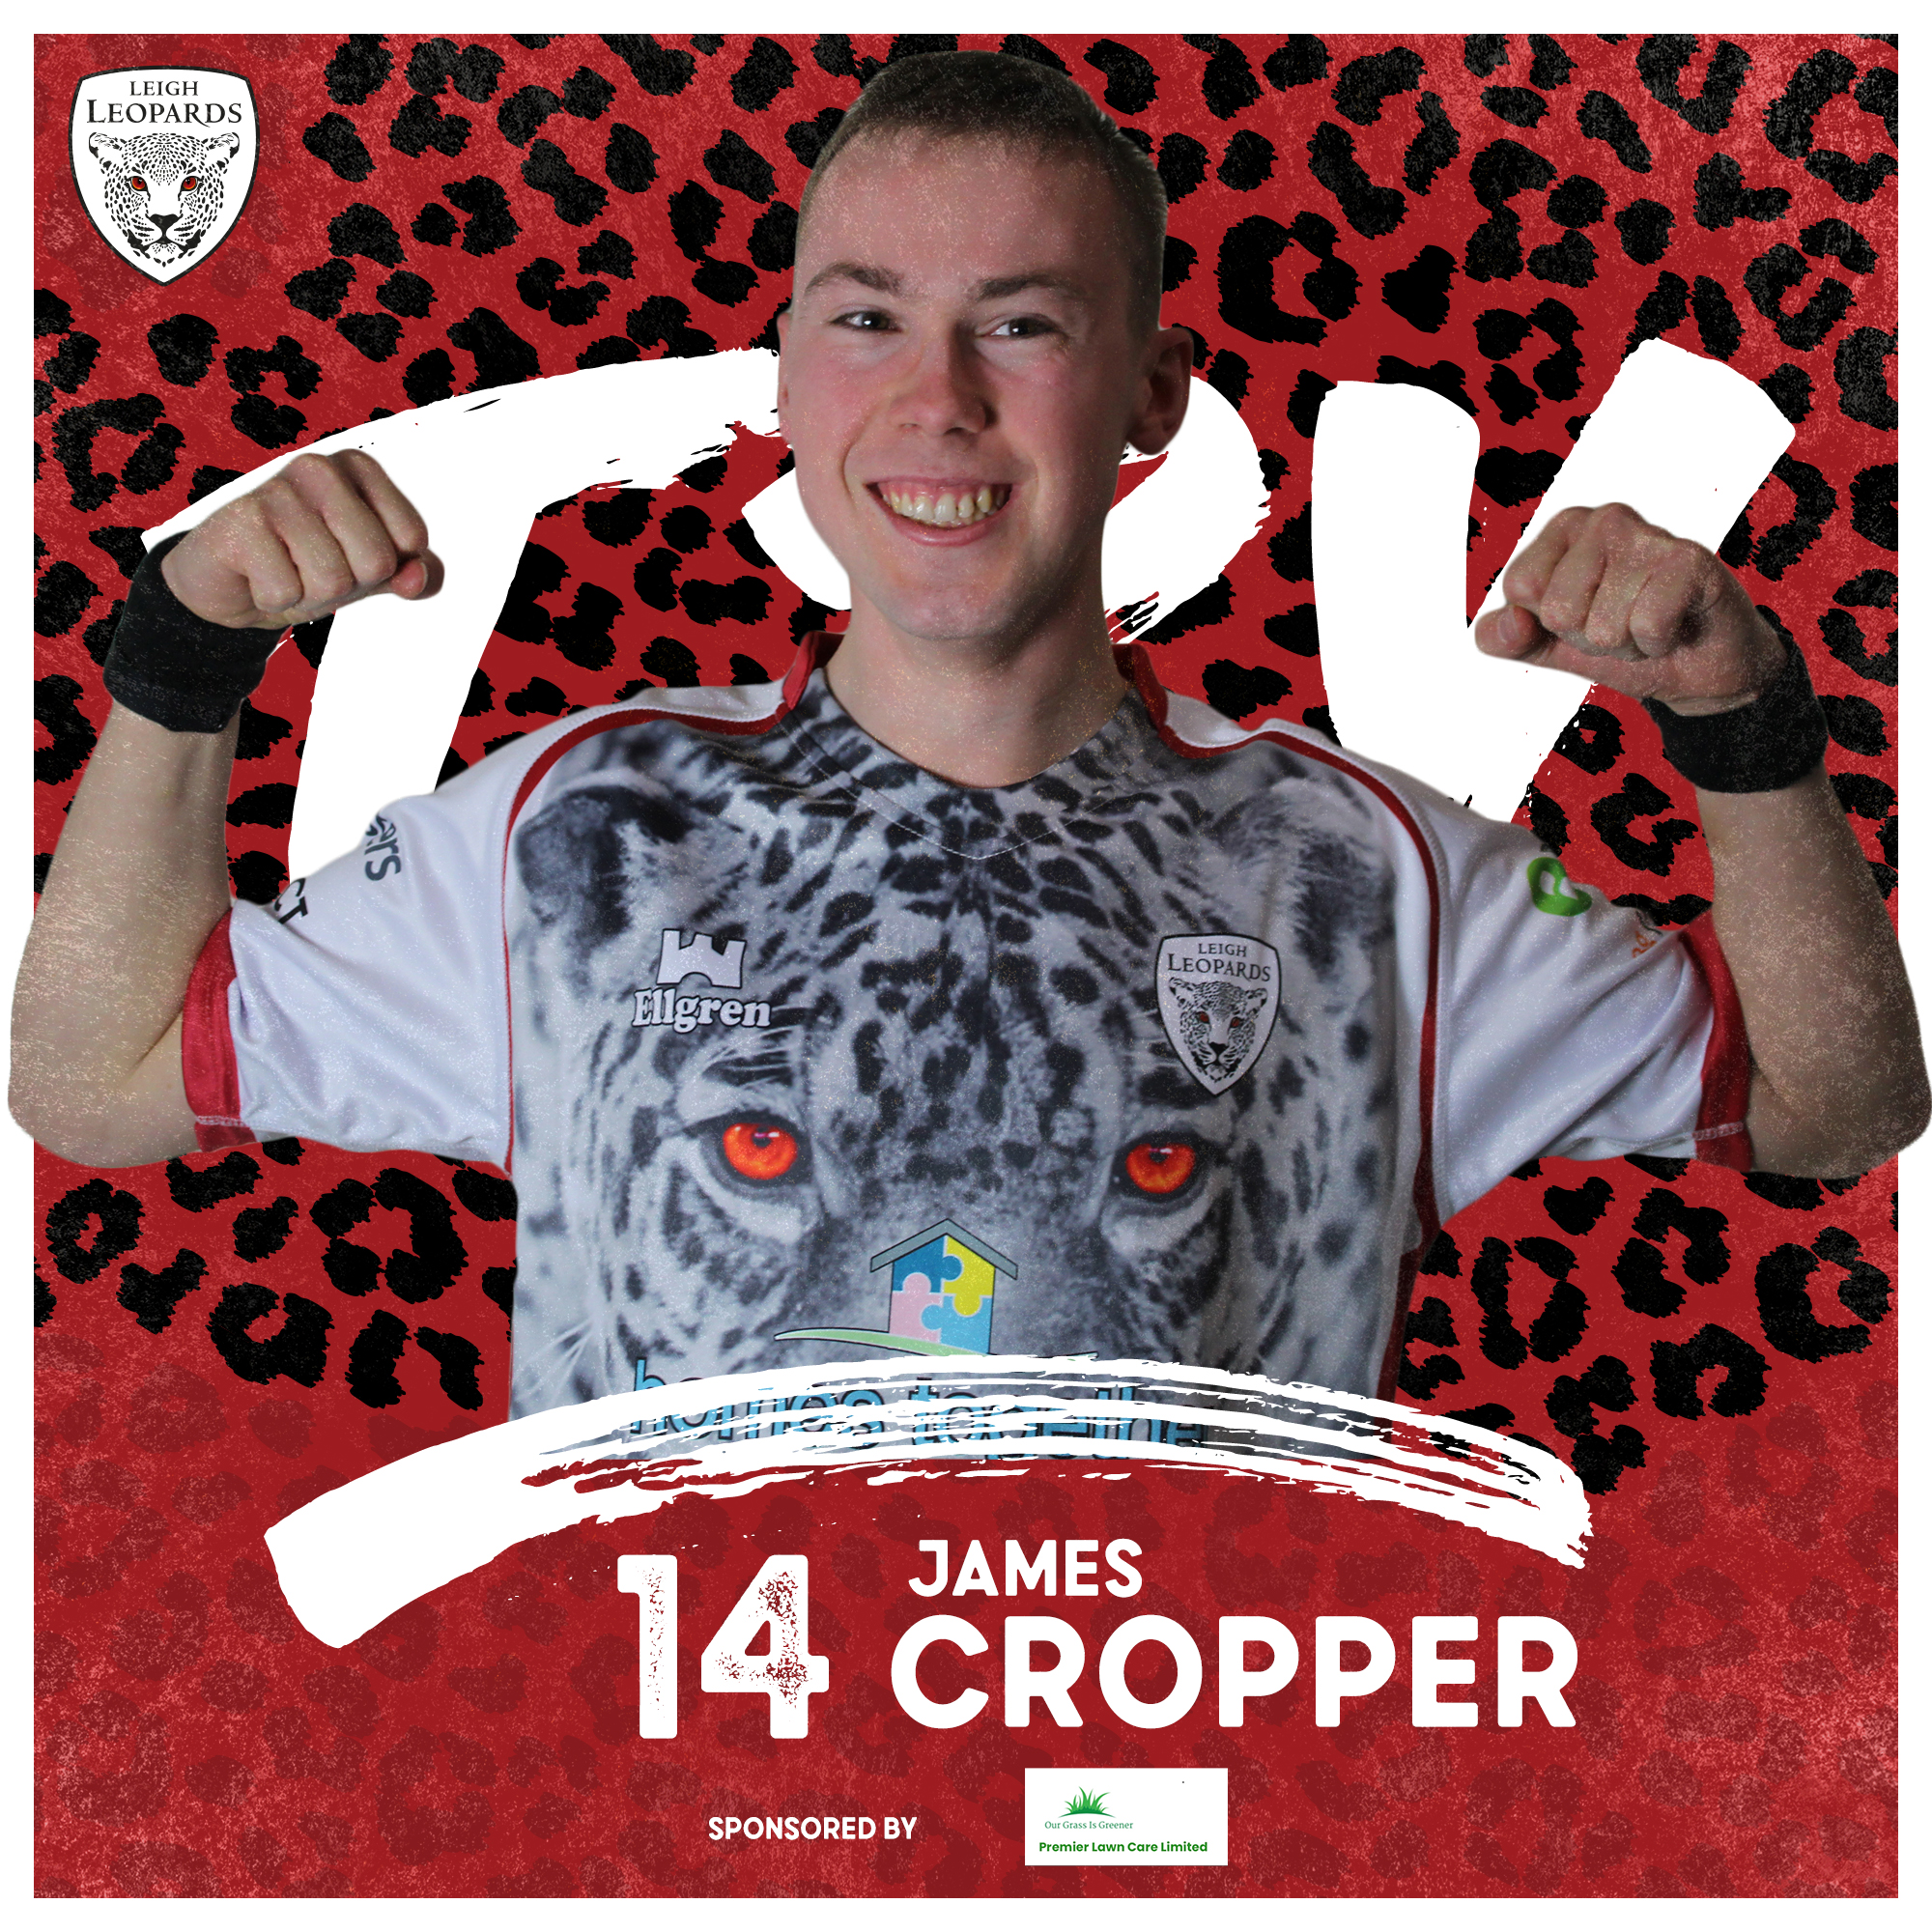 James Cropper TRY Template